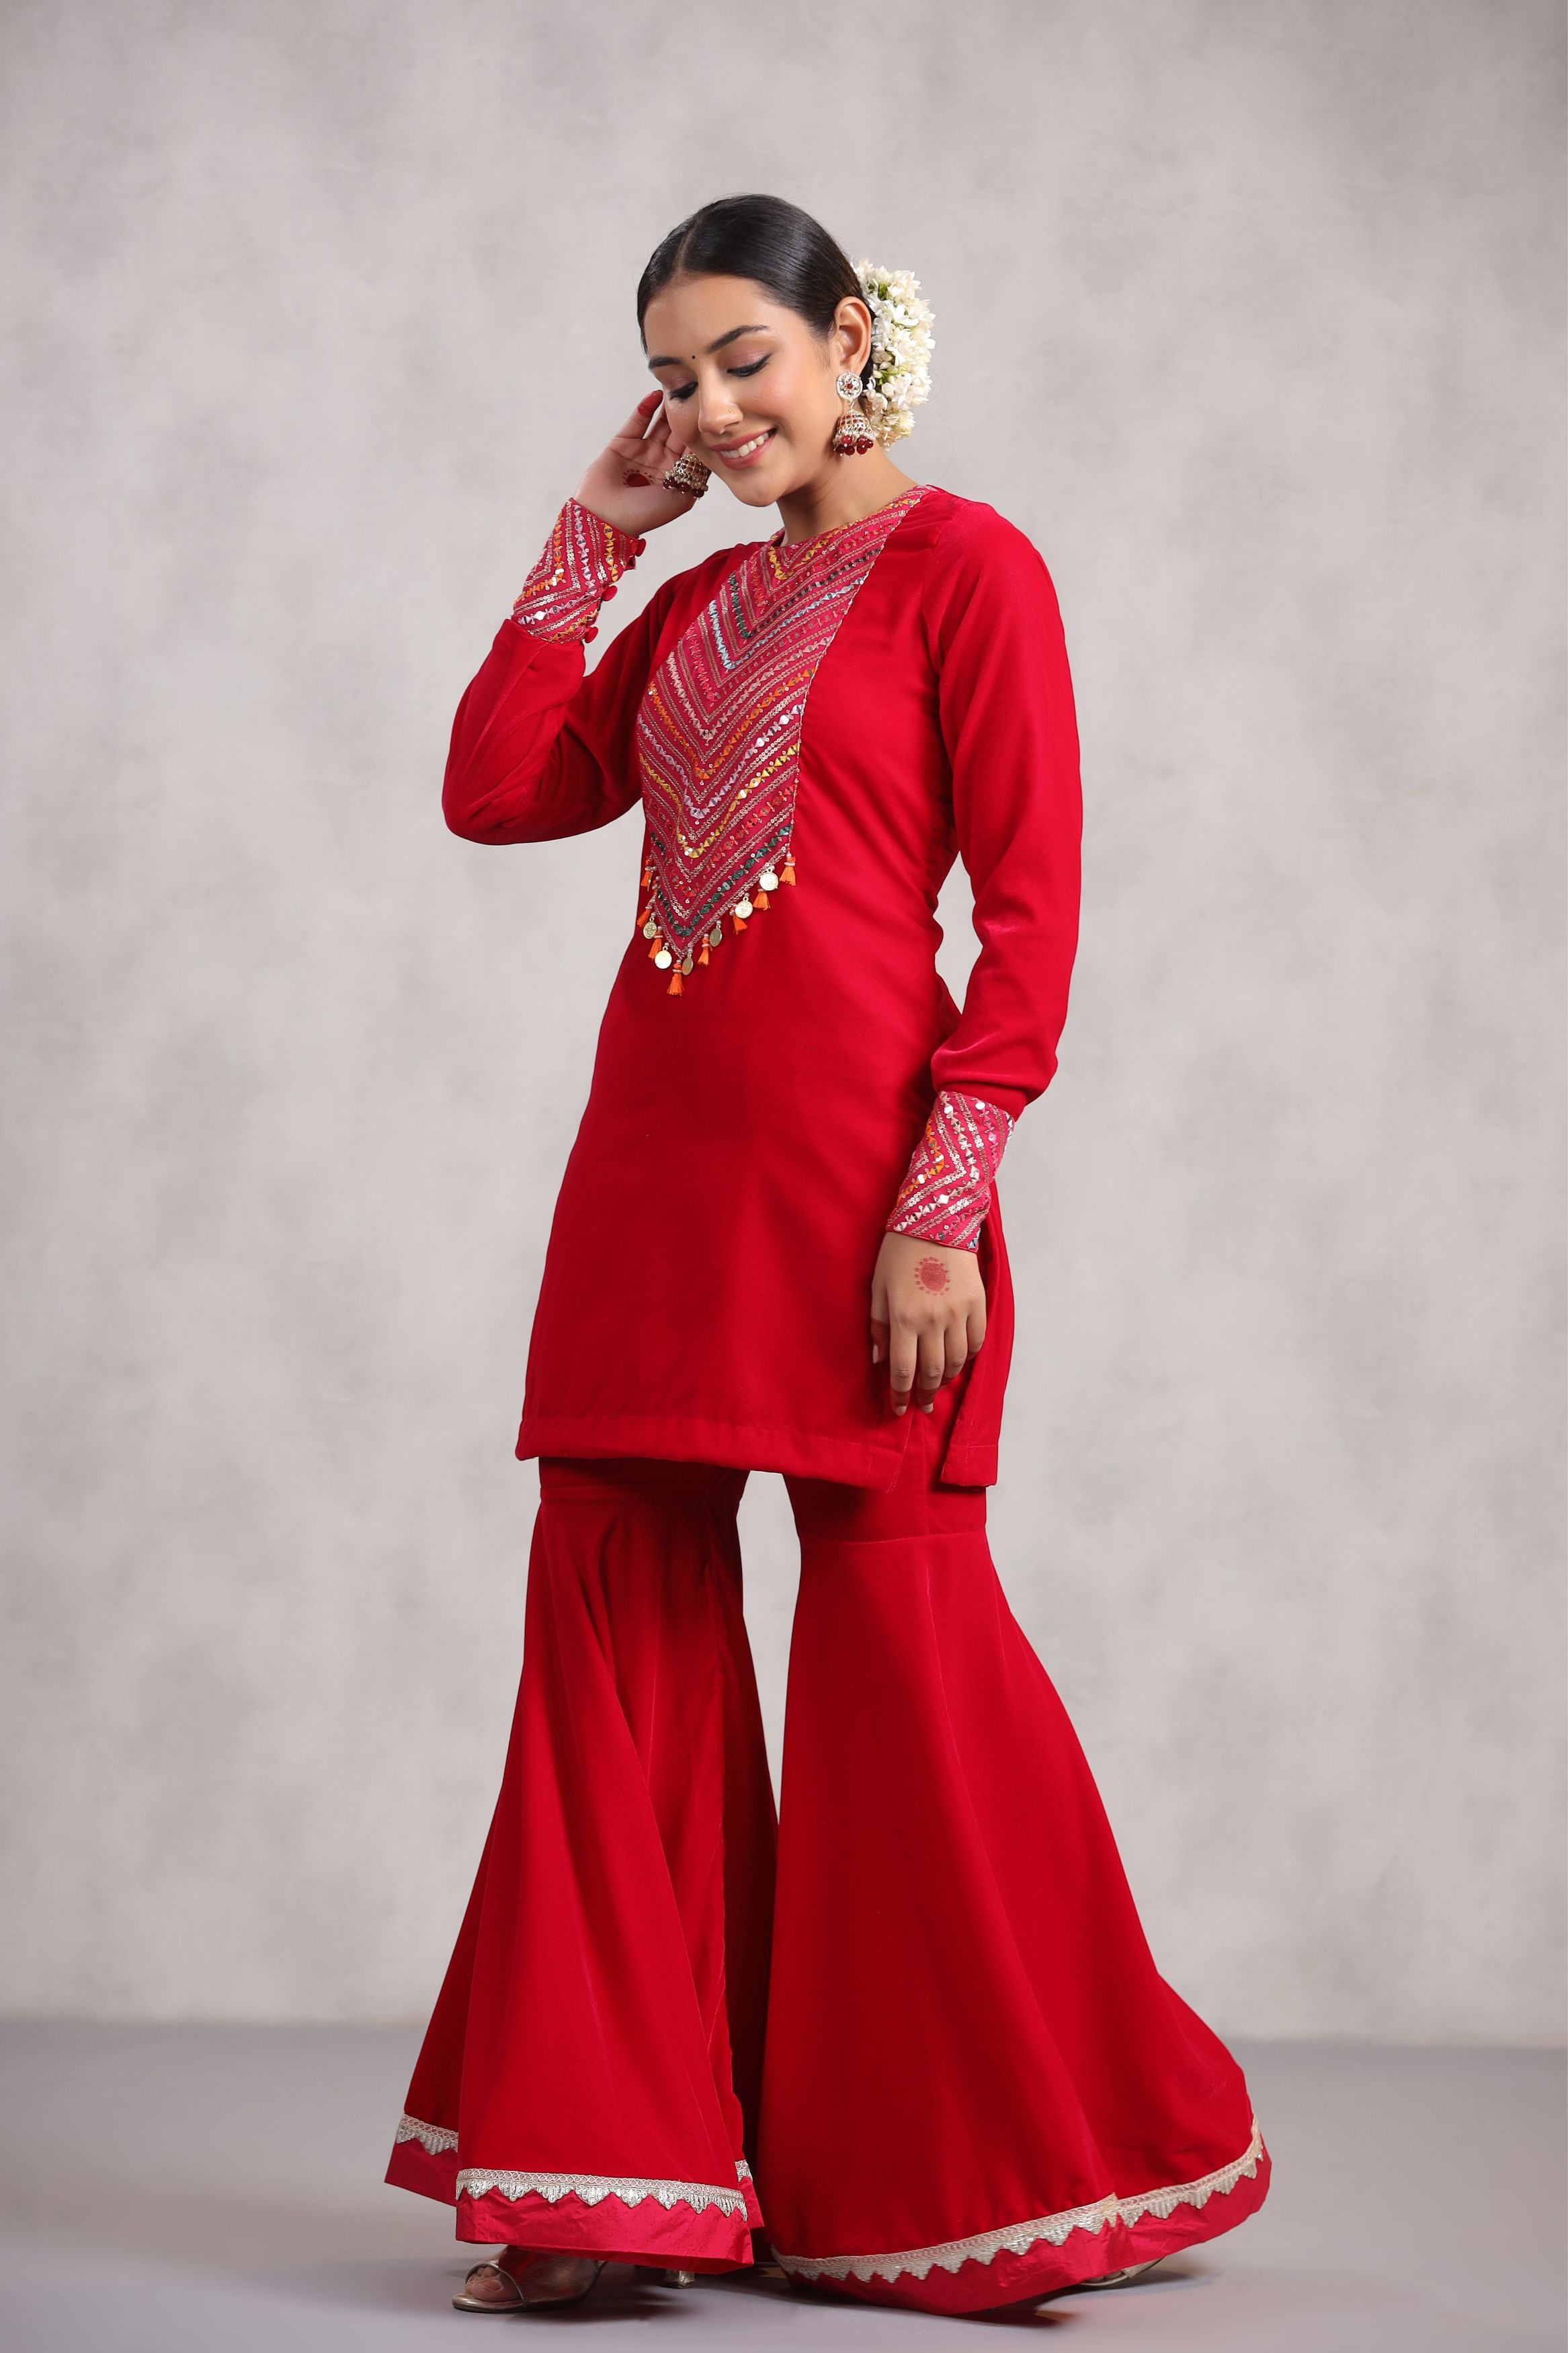 Fashion Ka Fatka Ahmedabad - Maroon Velvet Sharara Suit For Enquiry kindly  contact on whatsapp no:- +917265866630 Shop now:  https://www.fashionkafatka.com/maroon-velvet-sharara-suit.html For more  collections kindly visit our website www.fashionkafatka ...